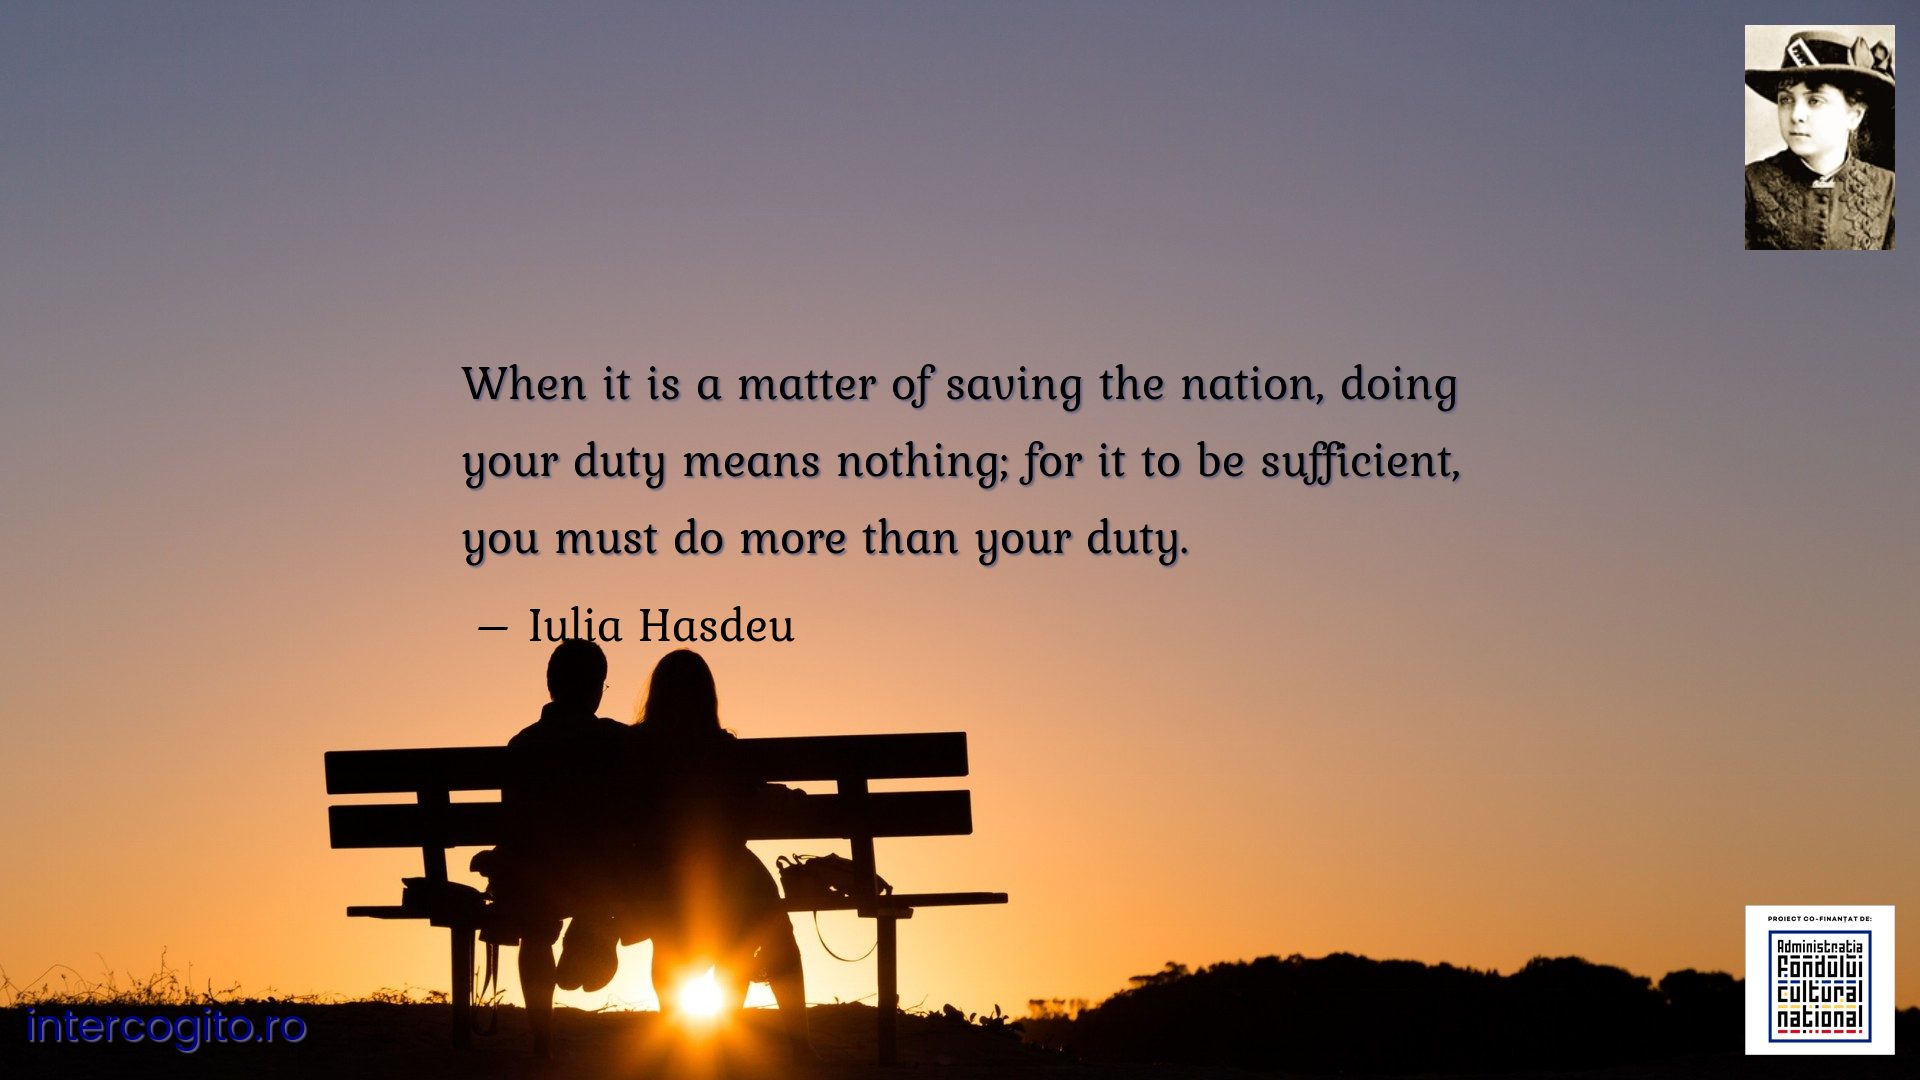 When it is a matter of saving the nation, doing your duty means nothing; for it to be sufficient, you must do more than your duty.